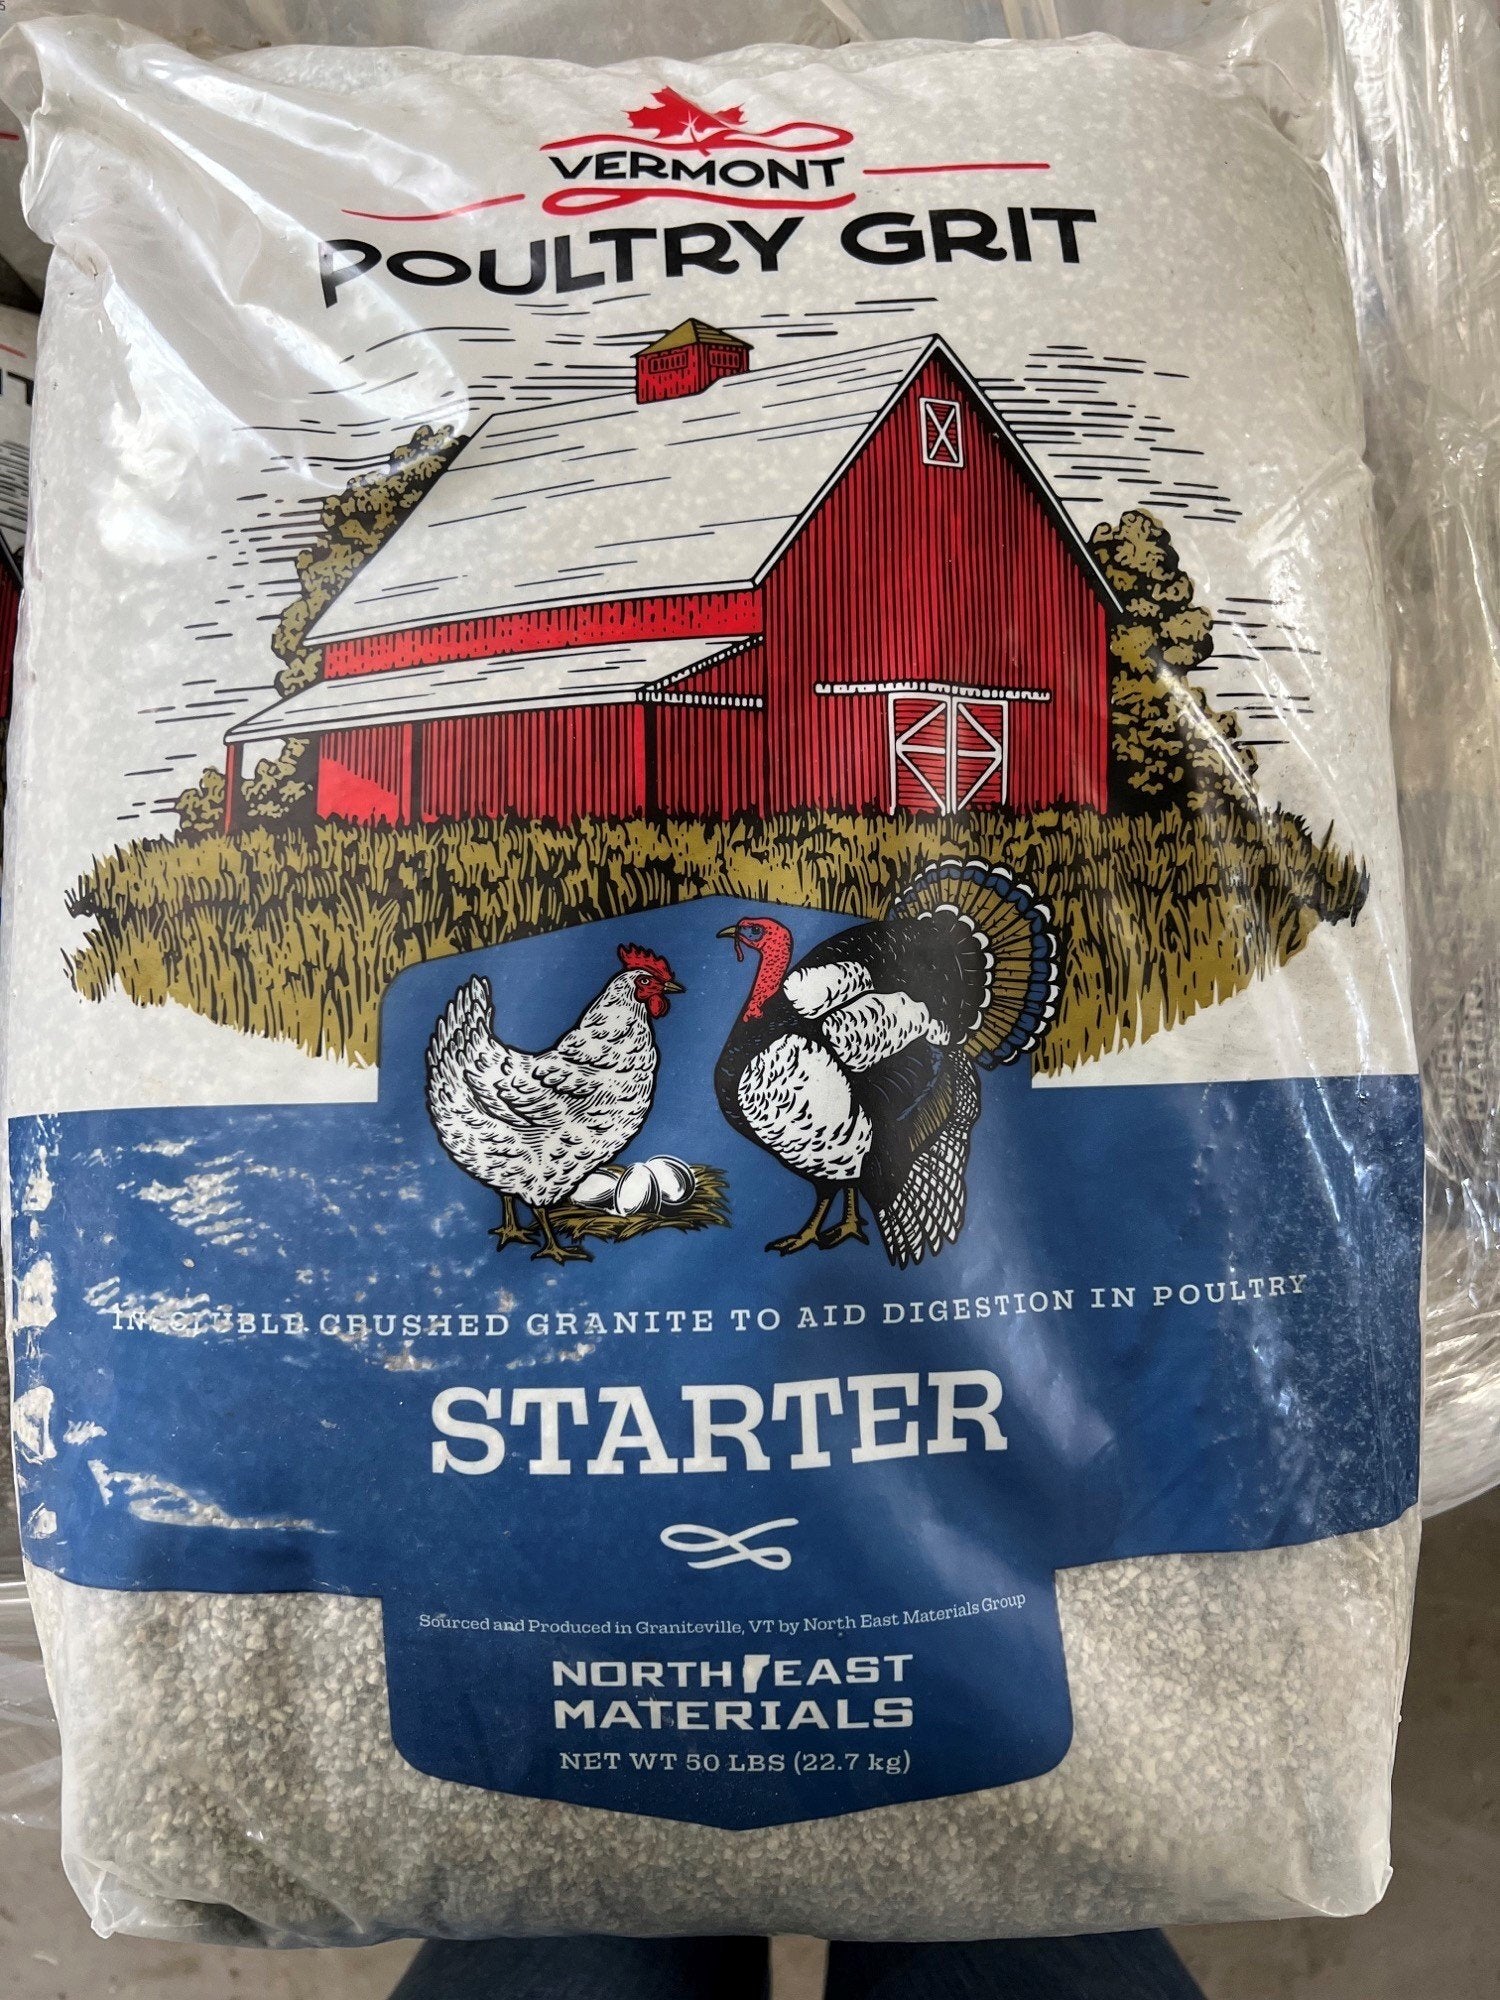 Vermont Poultry Grit - Starter